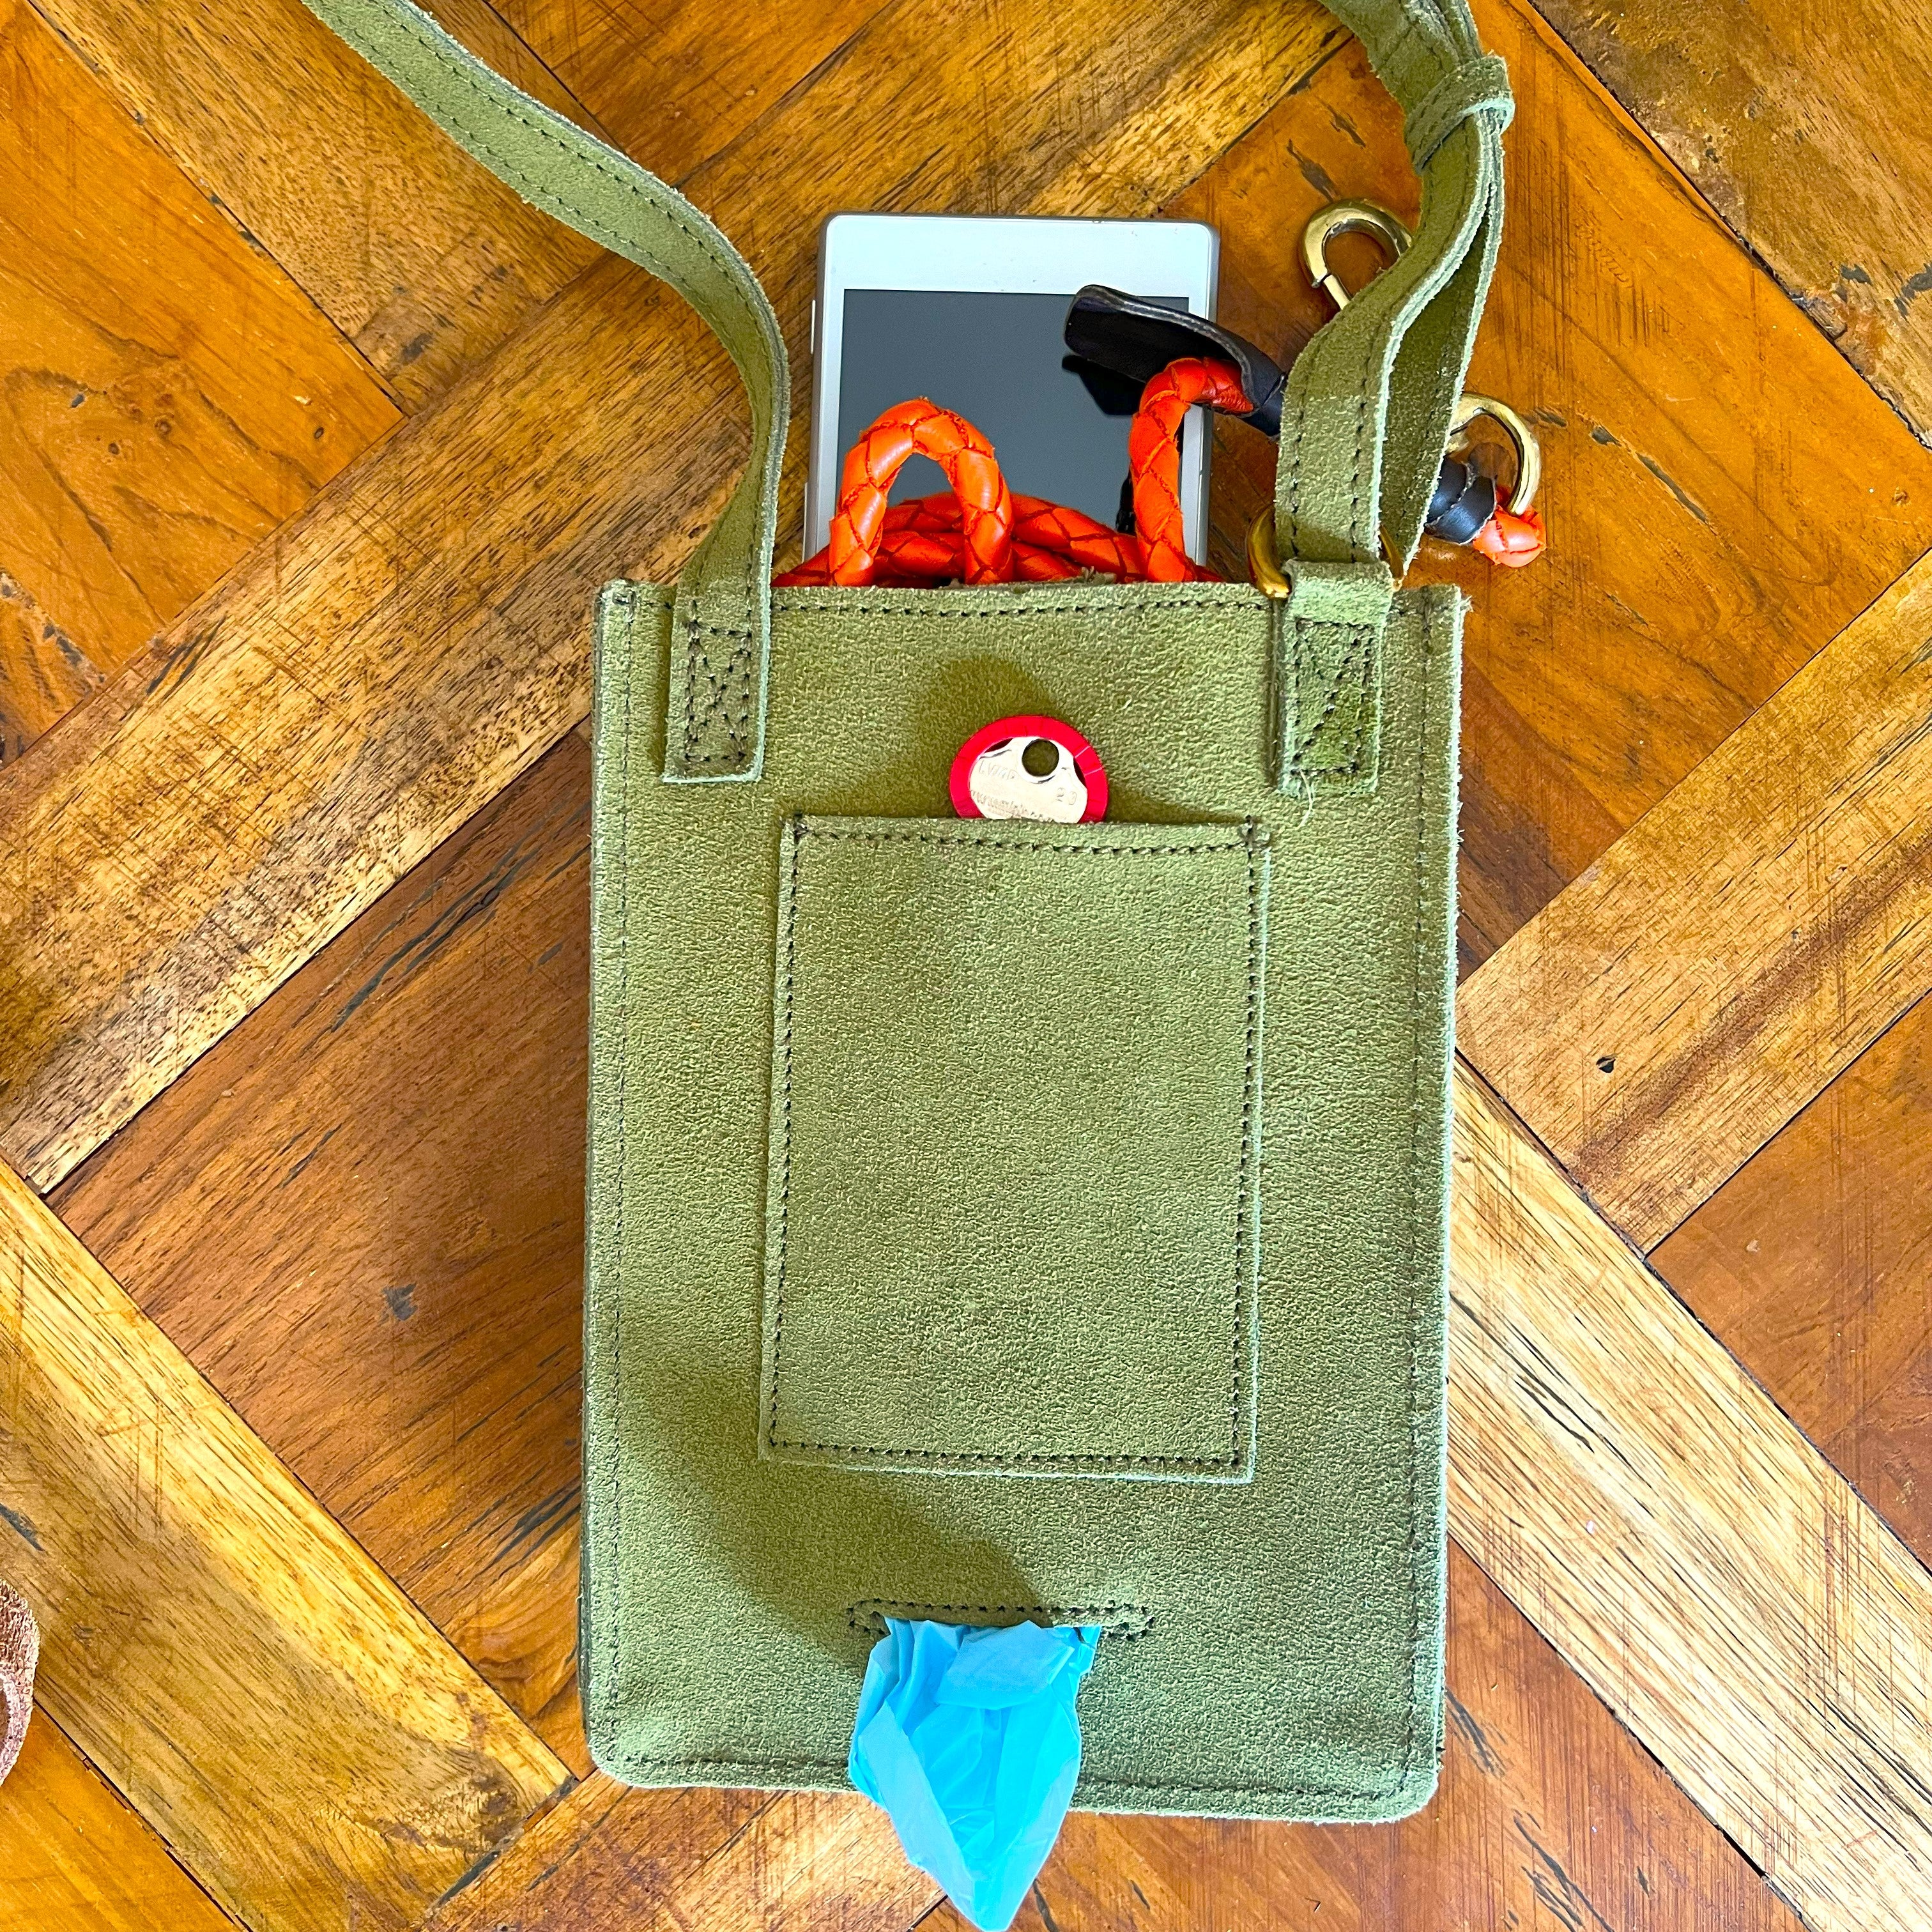 A grass green Dog Walk Bag crafted from natural veg tanned leather lying on a wooden floor, open to show items inside: a white smartphone, an orange scarf, a red and white spotted keychain, and